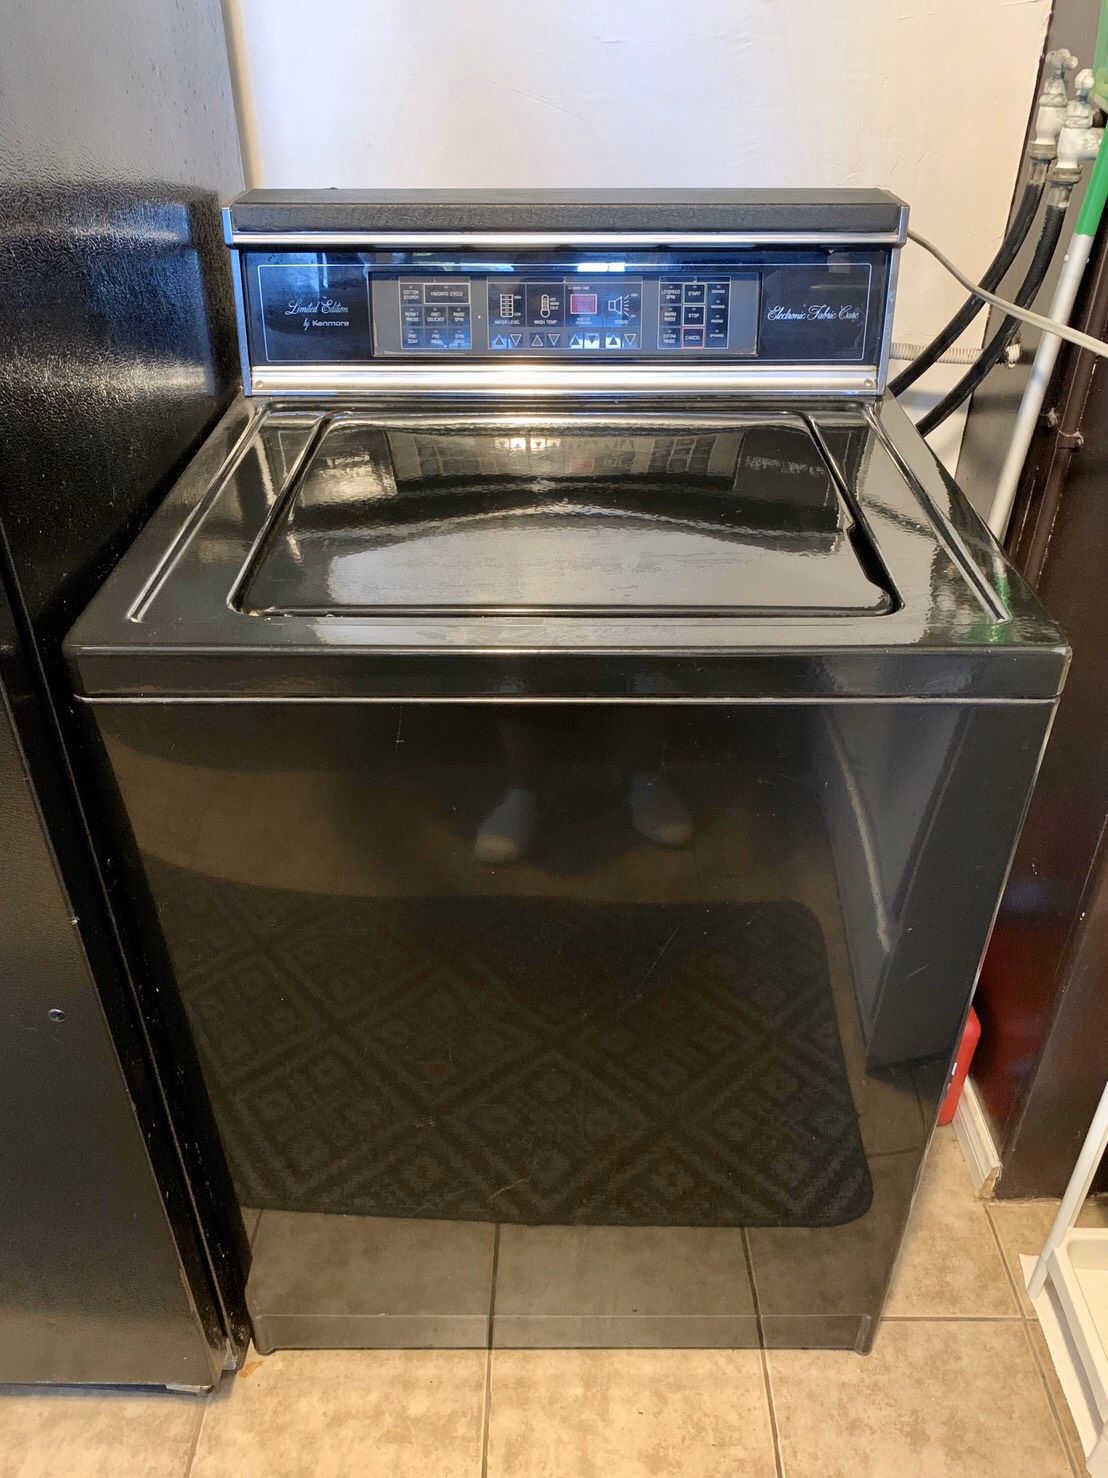 Kenmore washer and dryer too big for smaller apartment need space